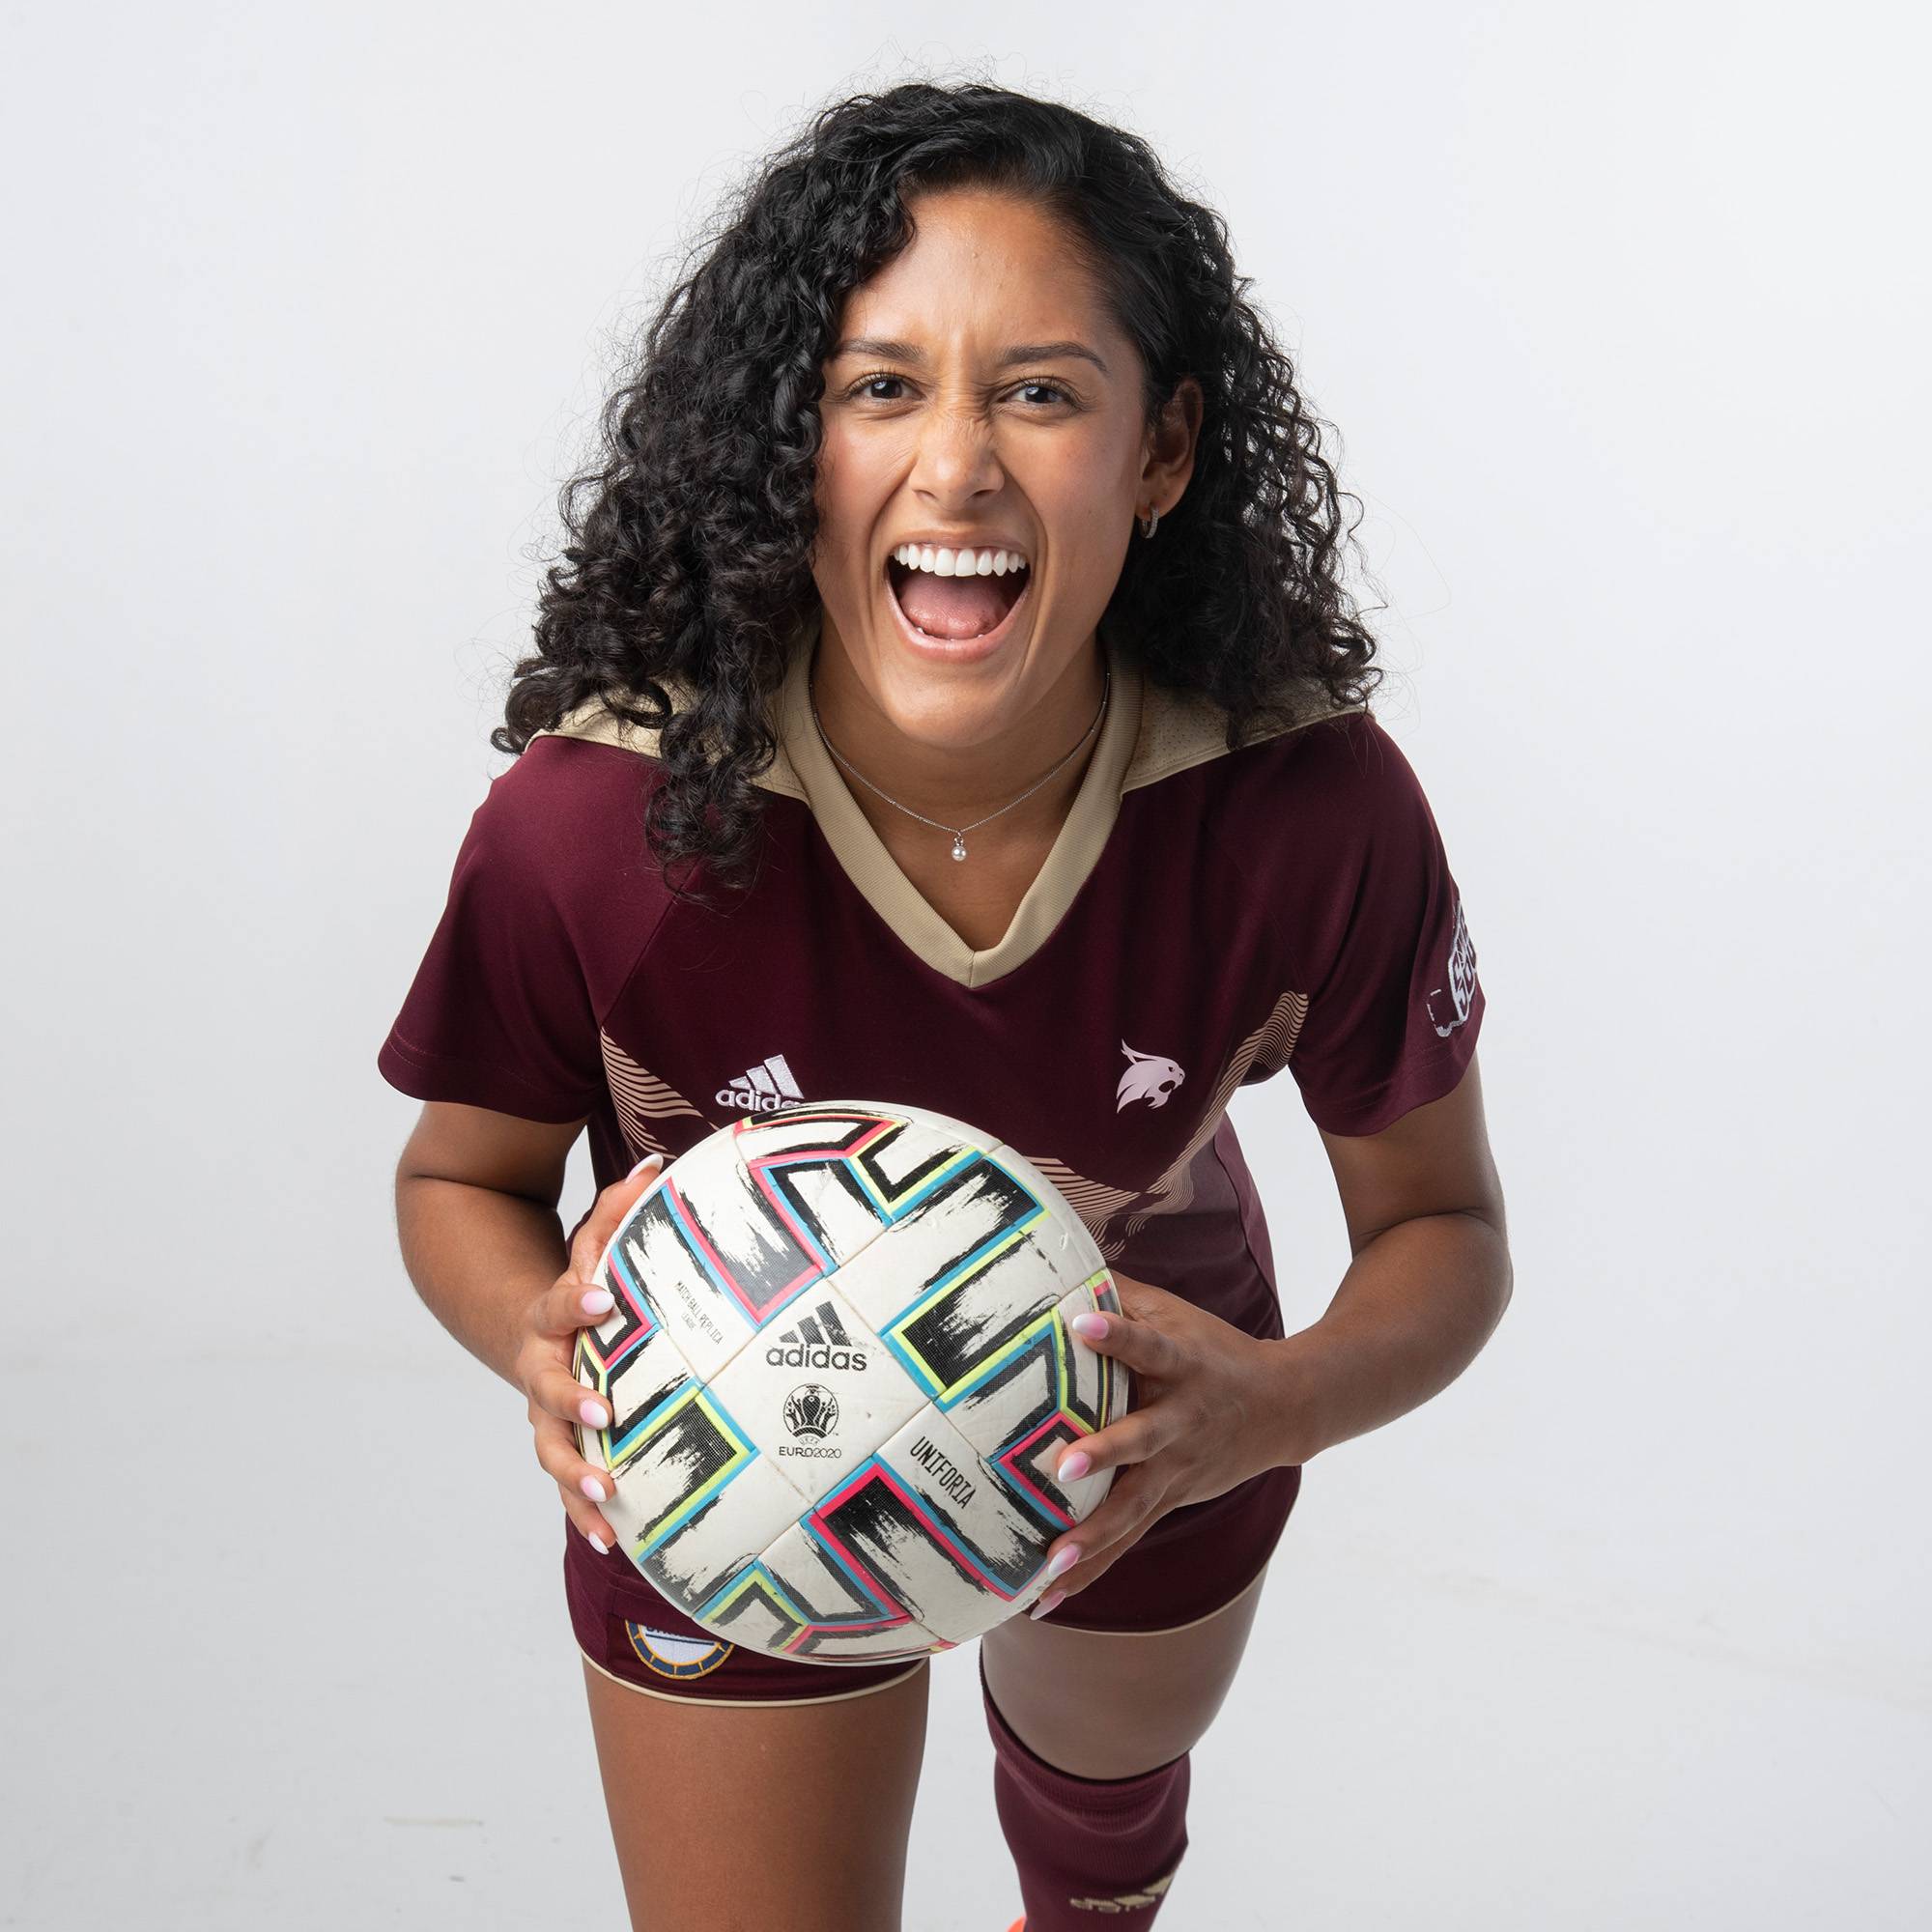 Juana Plata showing fierce facial expression and holding a soccer ball